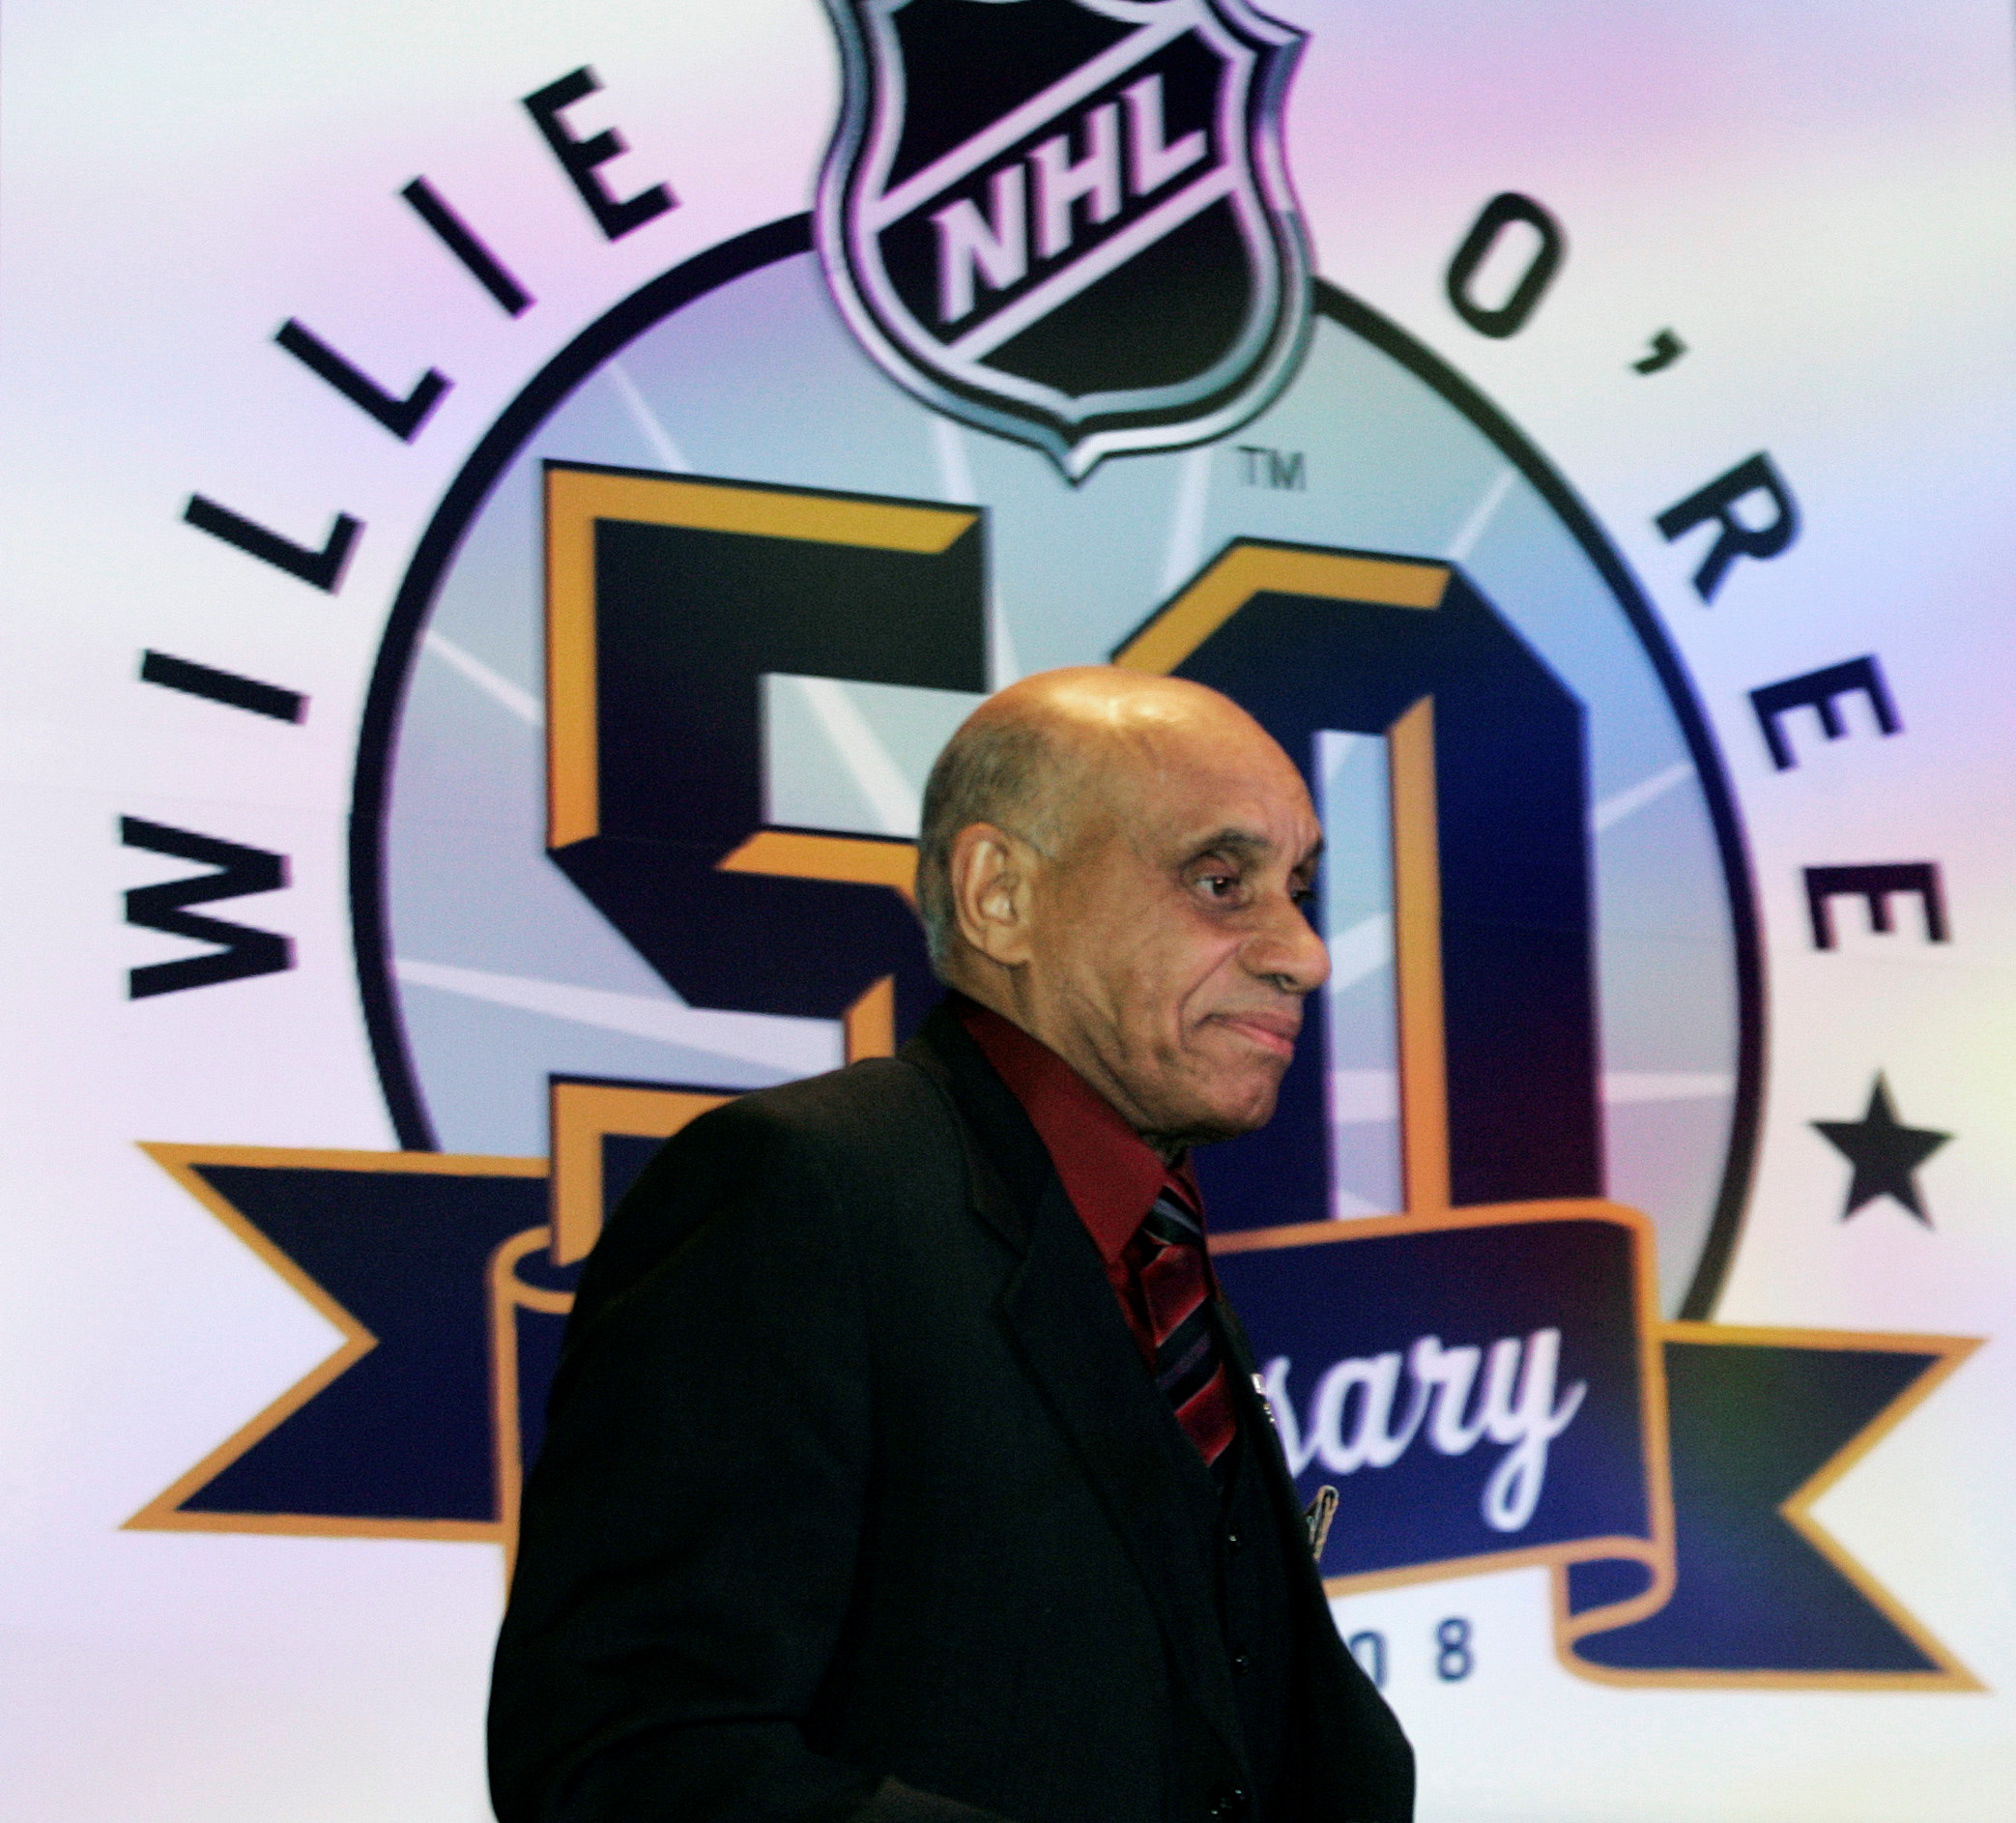 Willie O'Ree was the first black player in the NHL